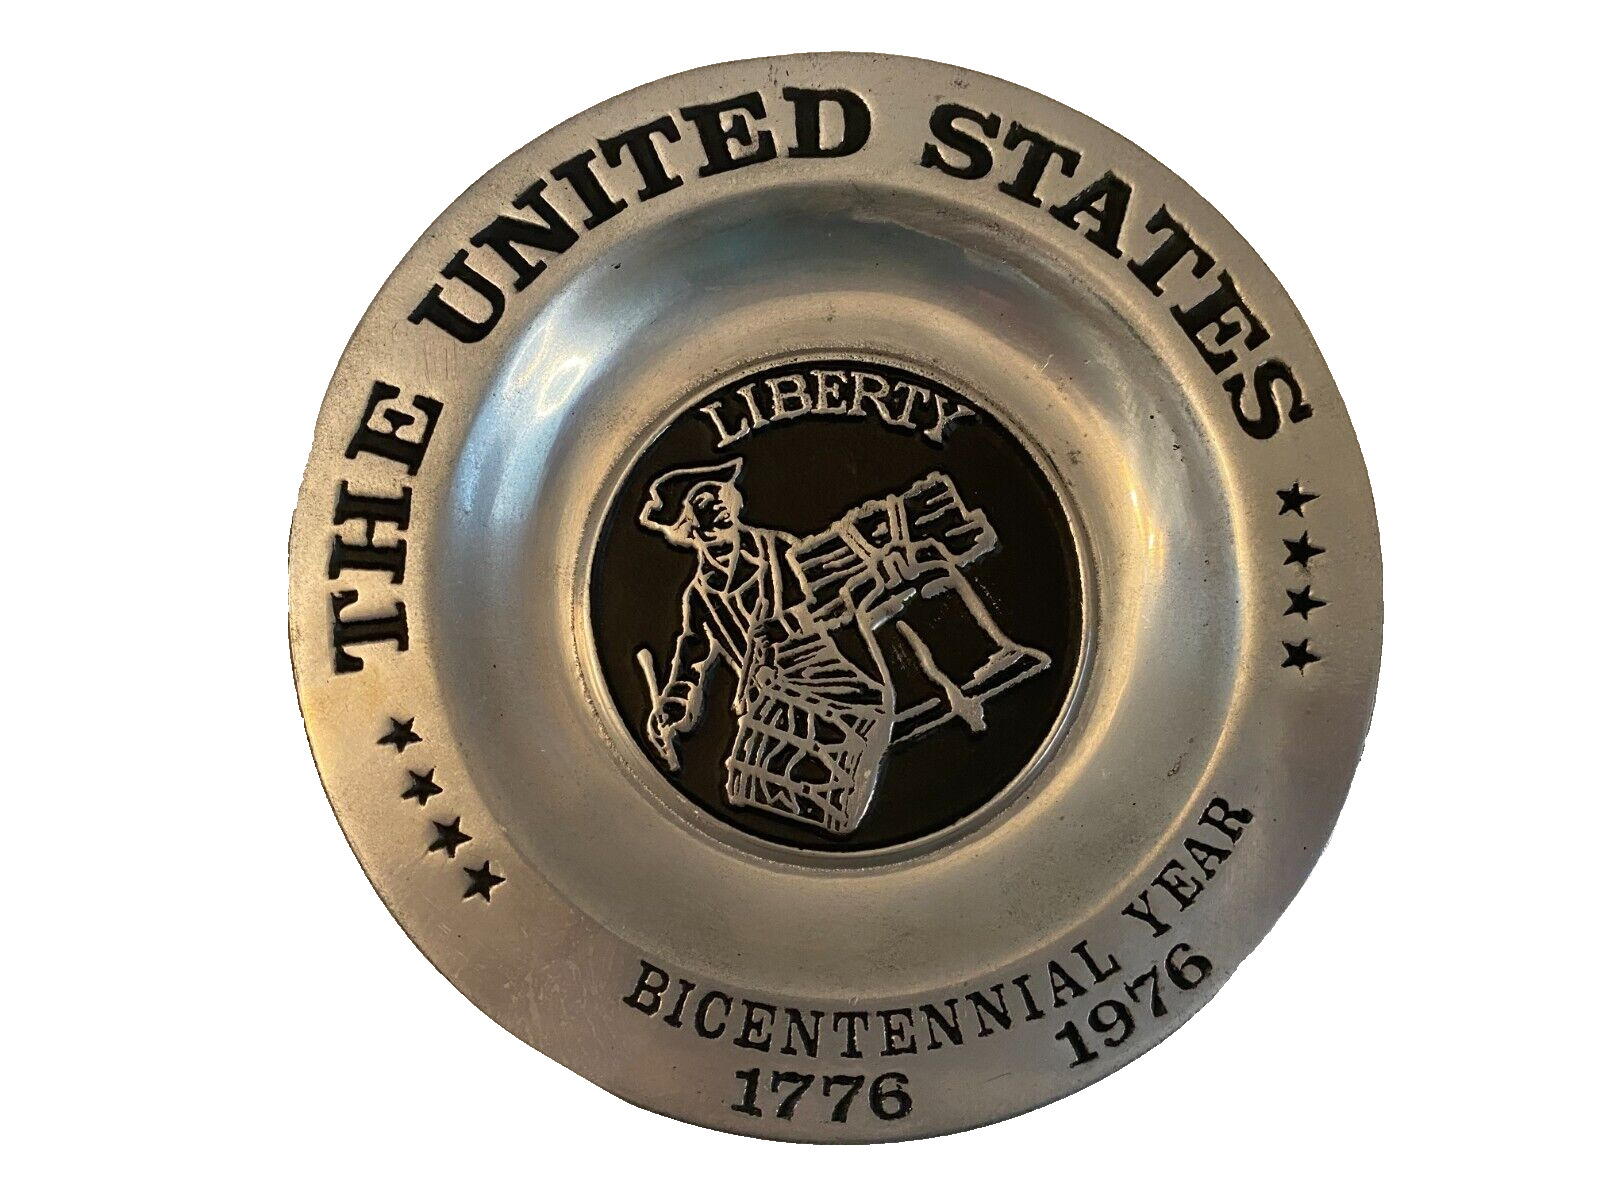 Pewter Plate UNITED STATES BICENTENNIAL 1776-1976 E.W. DRURY Wine Candle Coaster